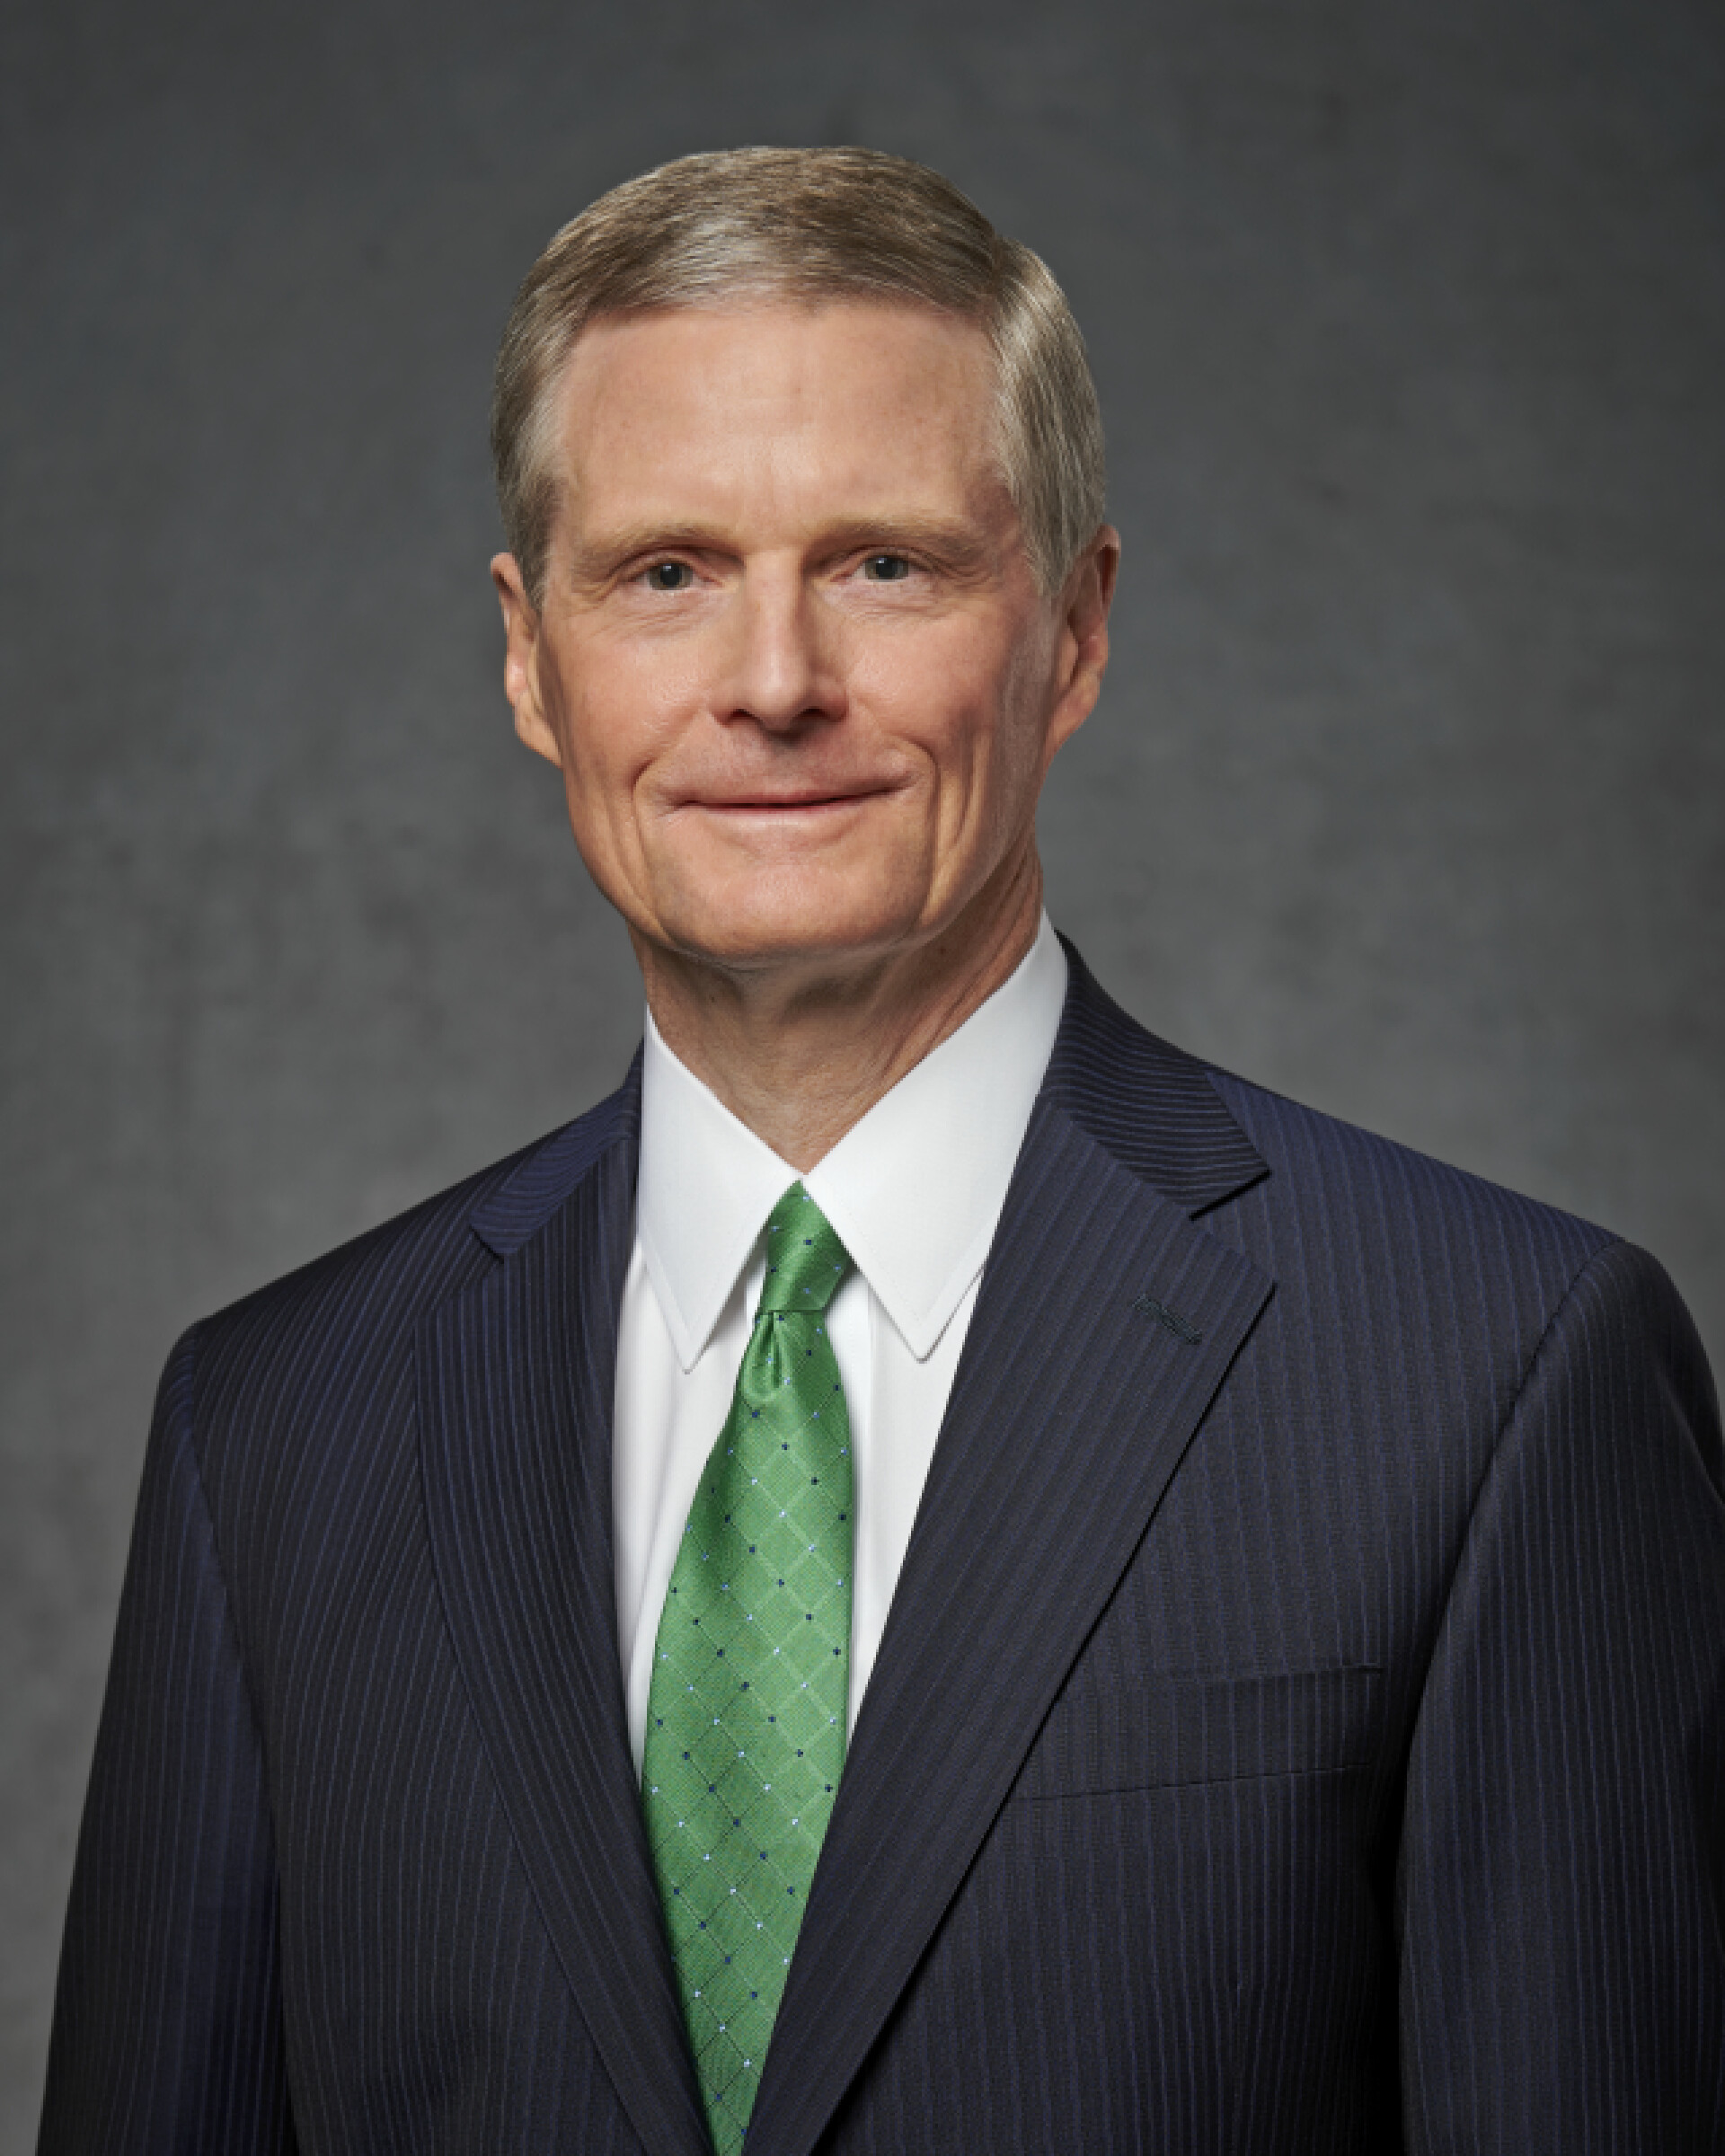 Elder David A. Bednar, a member of the Quorum of the Twelve Apostles of The Church of Jesus Christ of Latter-day Saints